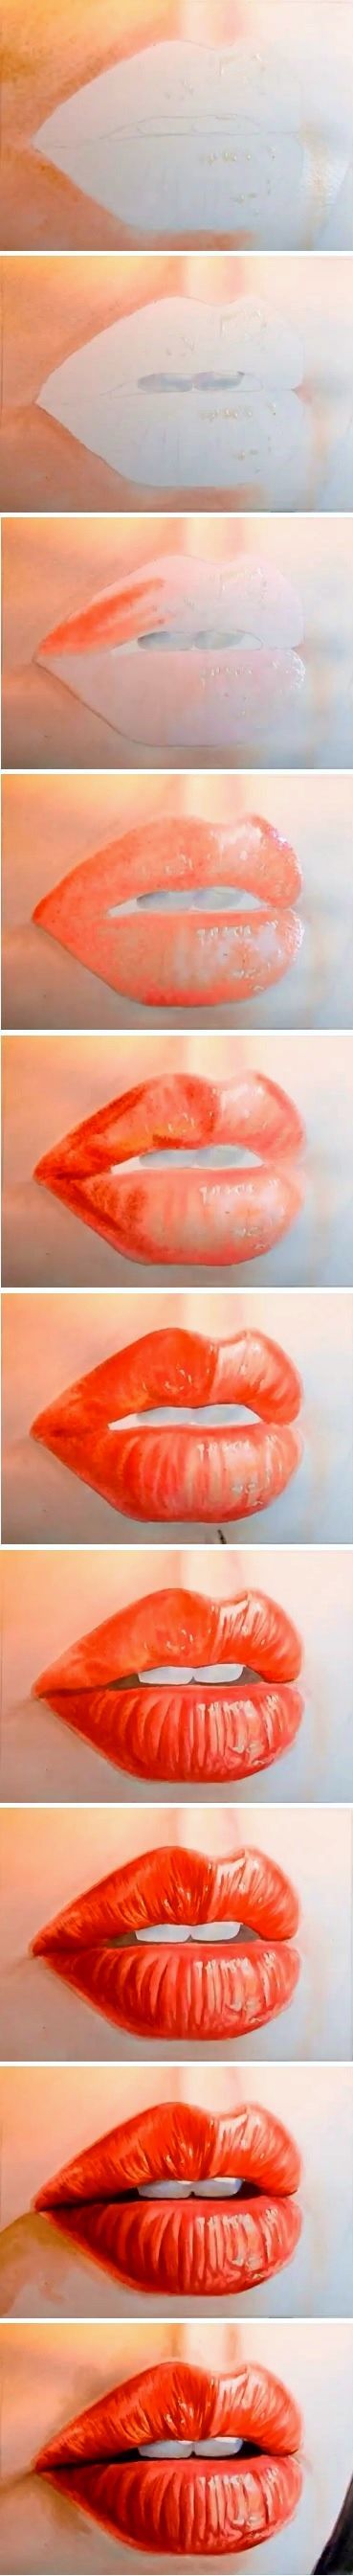 How to paint a realistic mouth in watercolor–video tutorial!